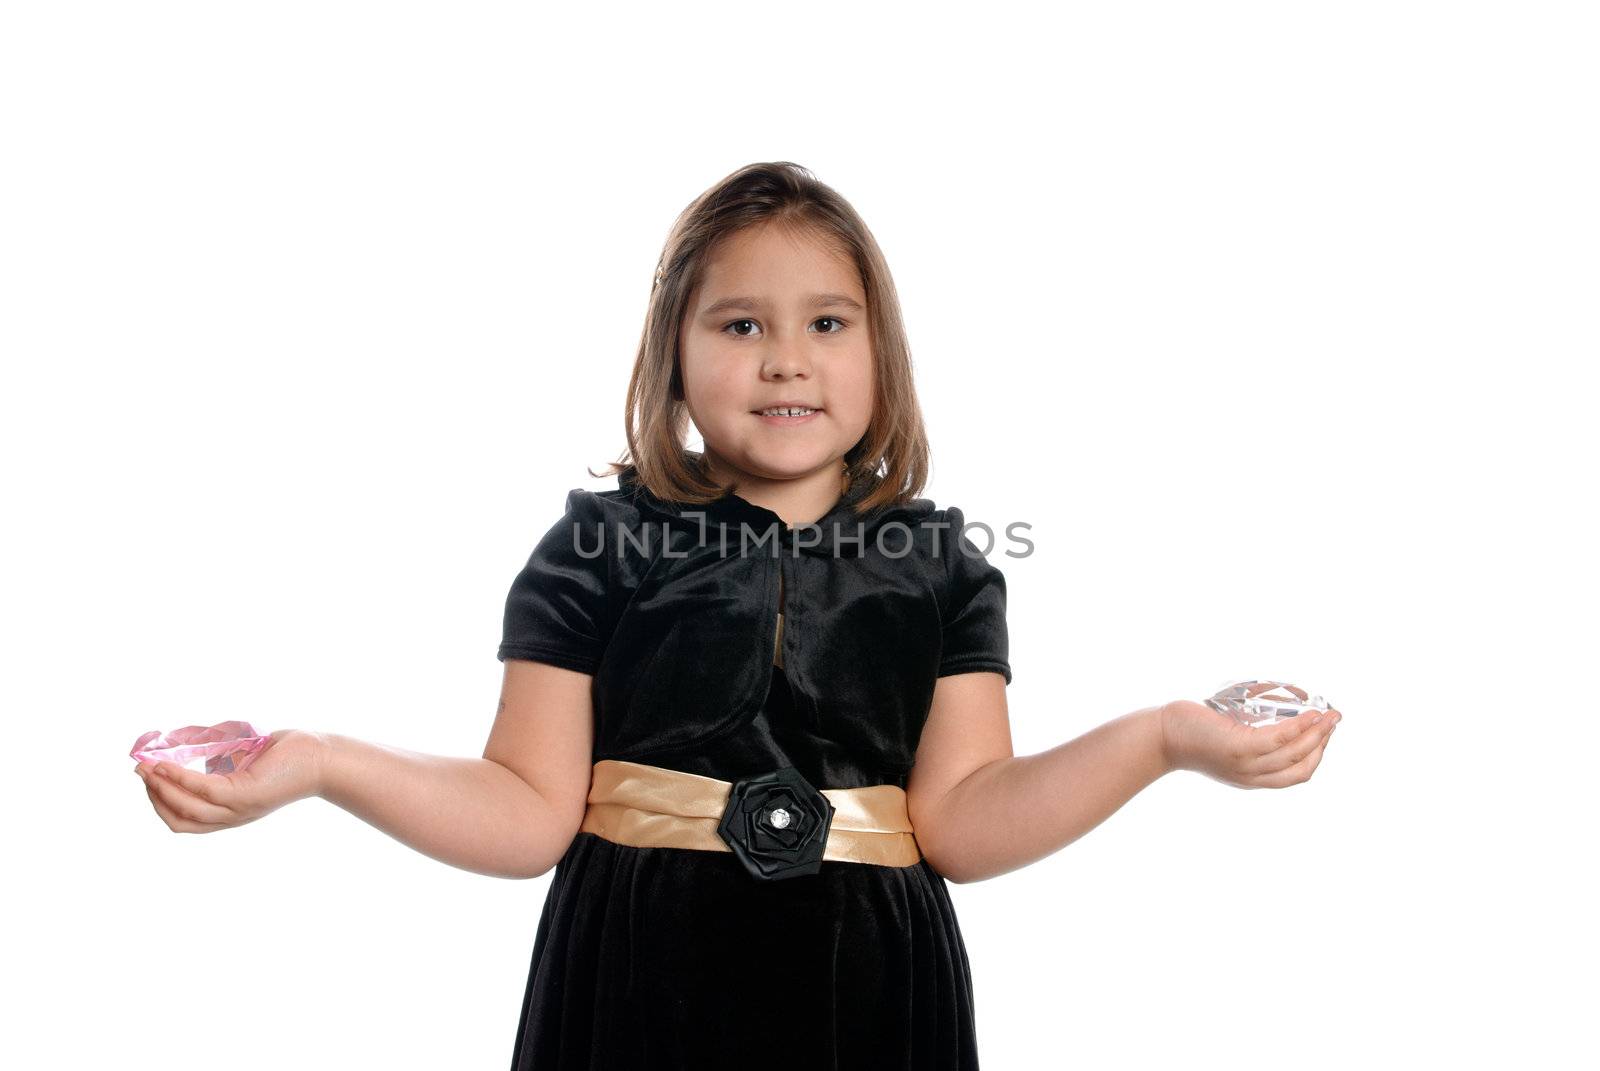 A 5 year old girl holding fake diamonds in her hands, isolated against a white background.